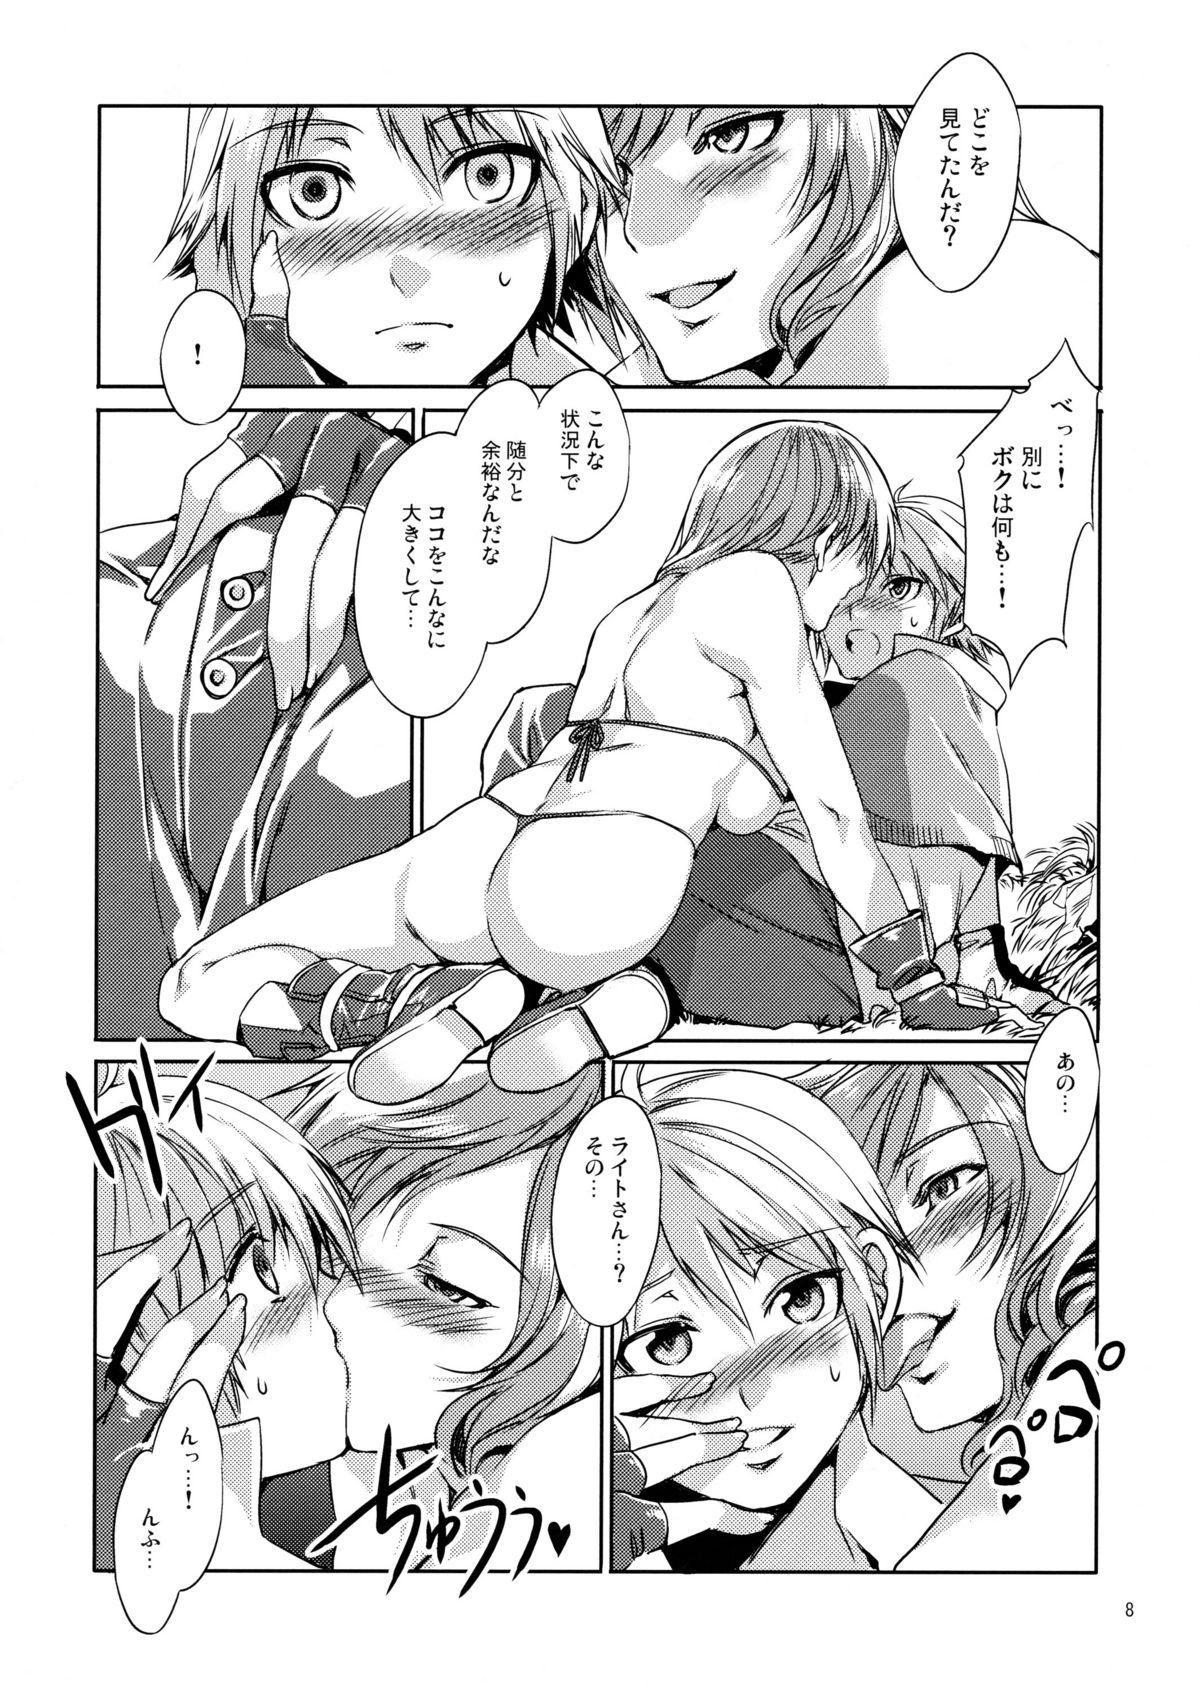 Assfucked Kousoku no Imyou wo Motsu Doujinshi | The Doujin Also Known As The Speed Of Light - Final fantasy xiii From - Page 7